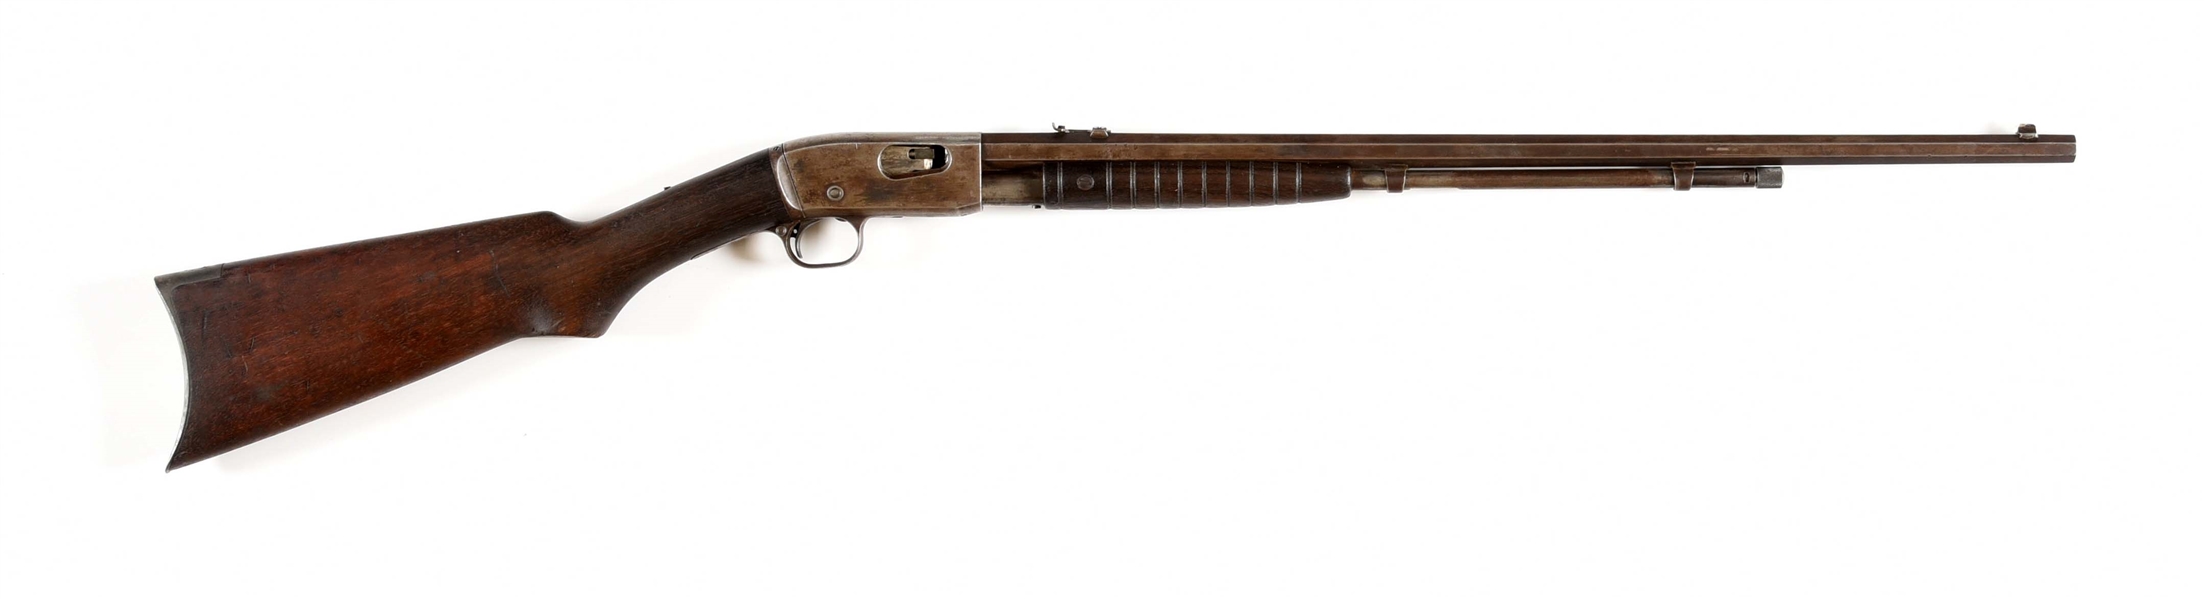 (C) REMINGTON MODEL 12 GALLERY SPECIAL SLIDE ACTION RIFLE 